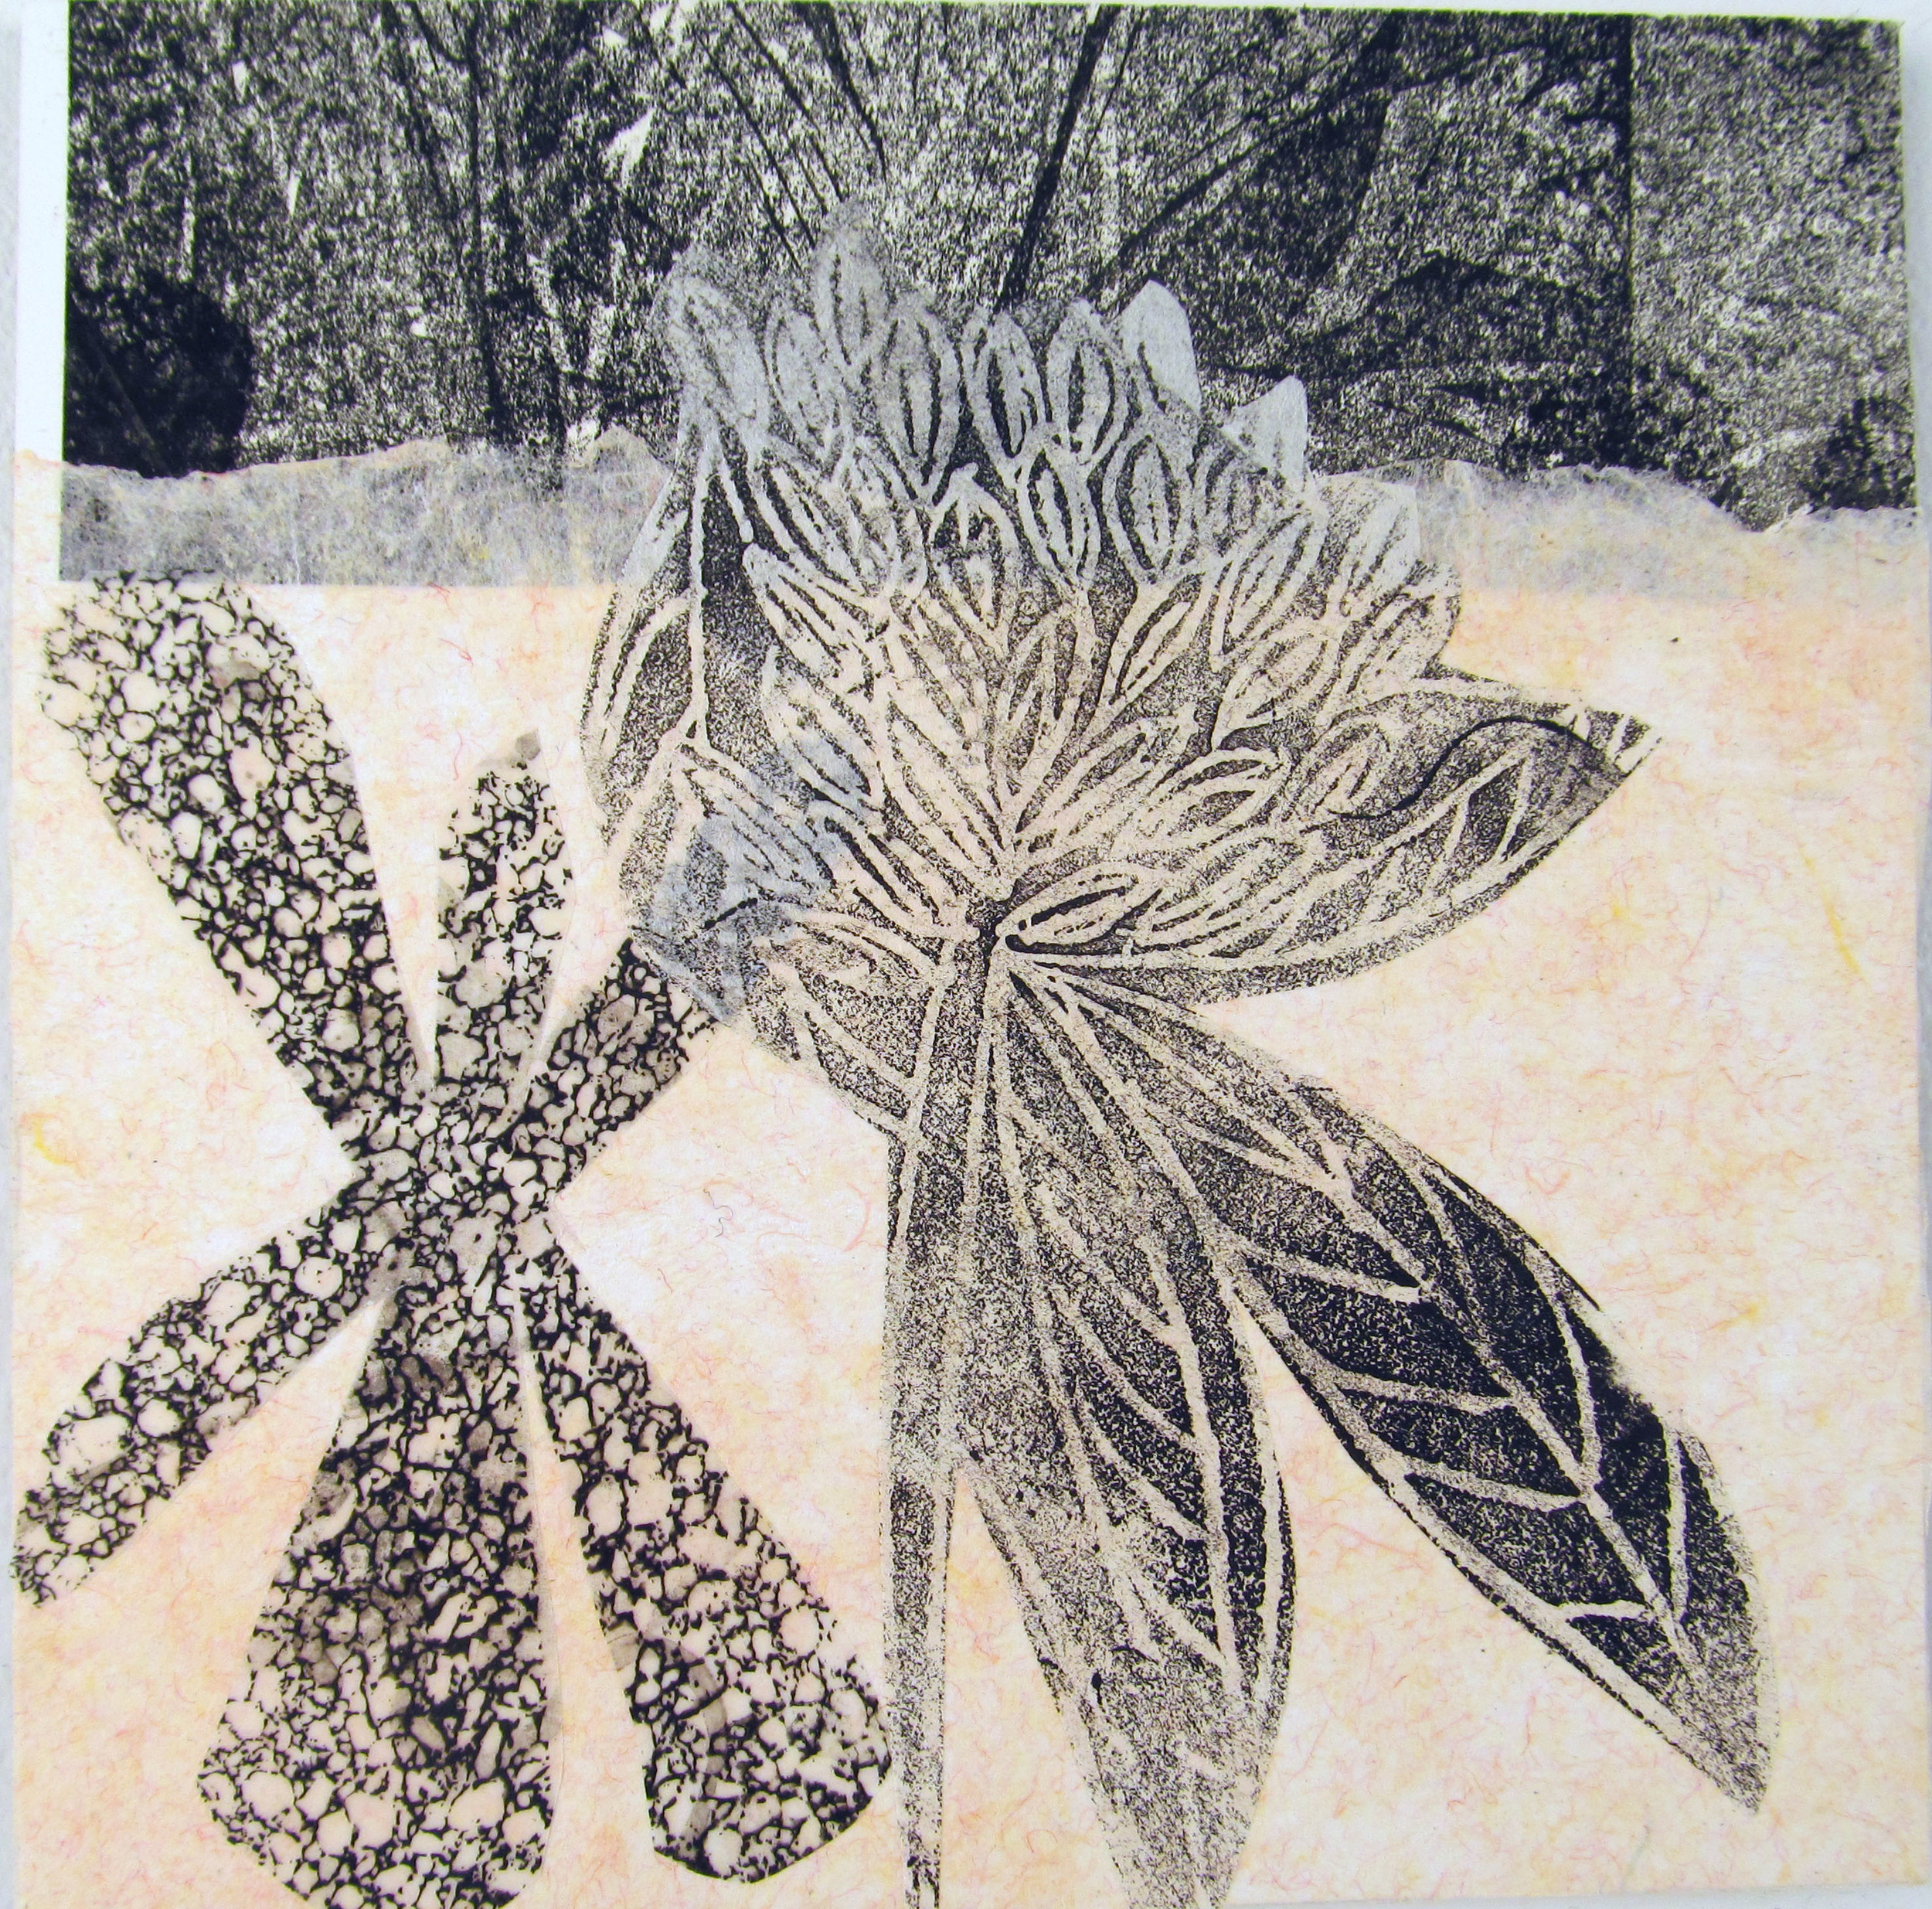  Apart of a series of monoprints, linoleum cuts, and chine-collé prints on vellum and handmade paper.  $475 